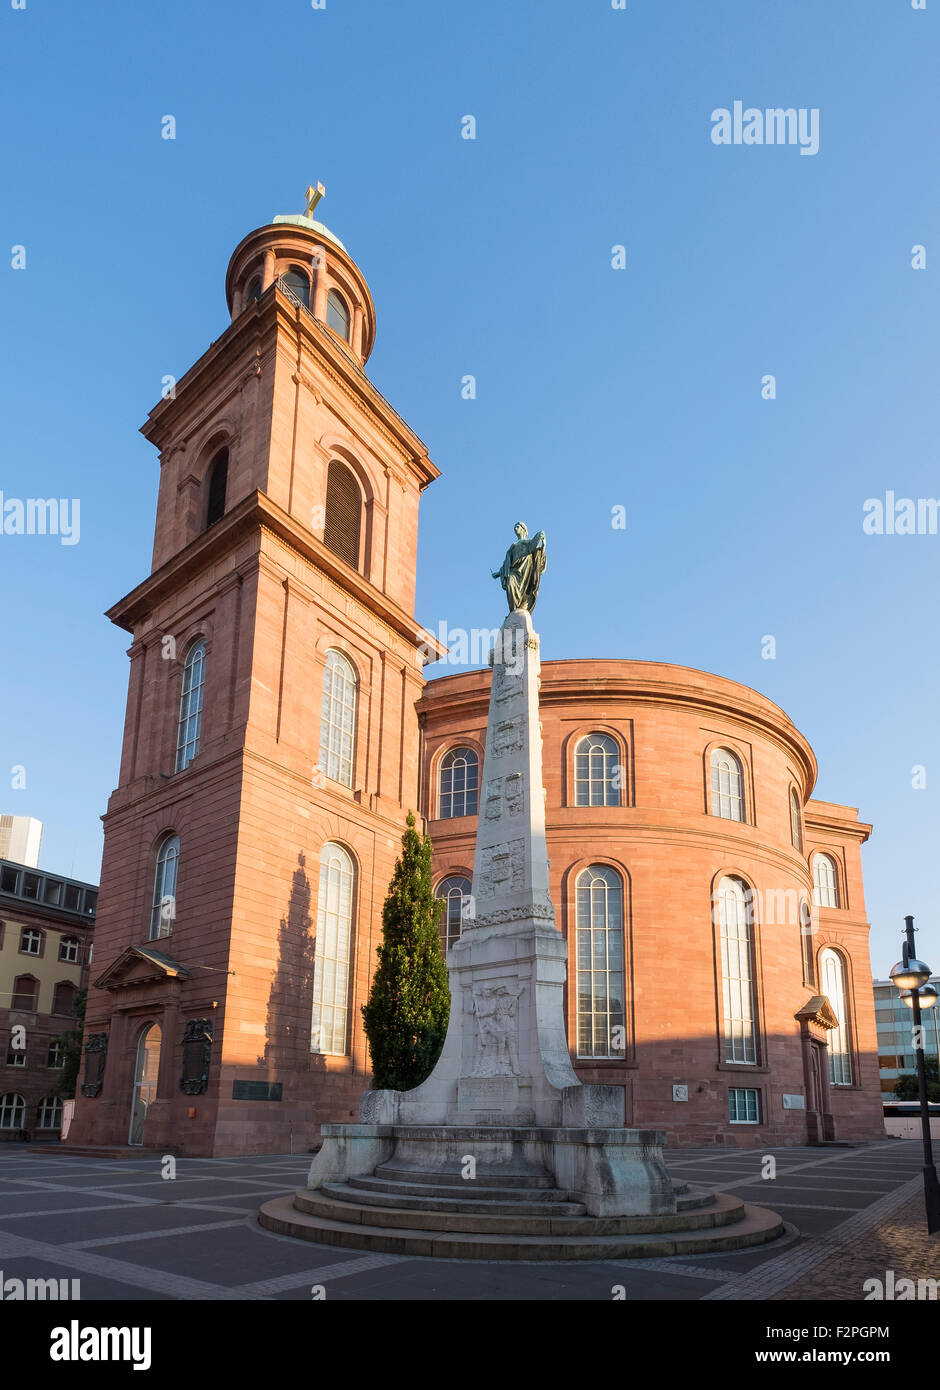 Germany, Hesse, Frankfurt, St Paul's Square, Unity Monument and St Paul's Church Stock Photo